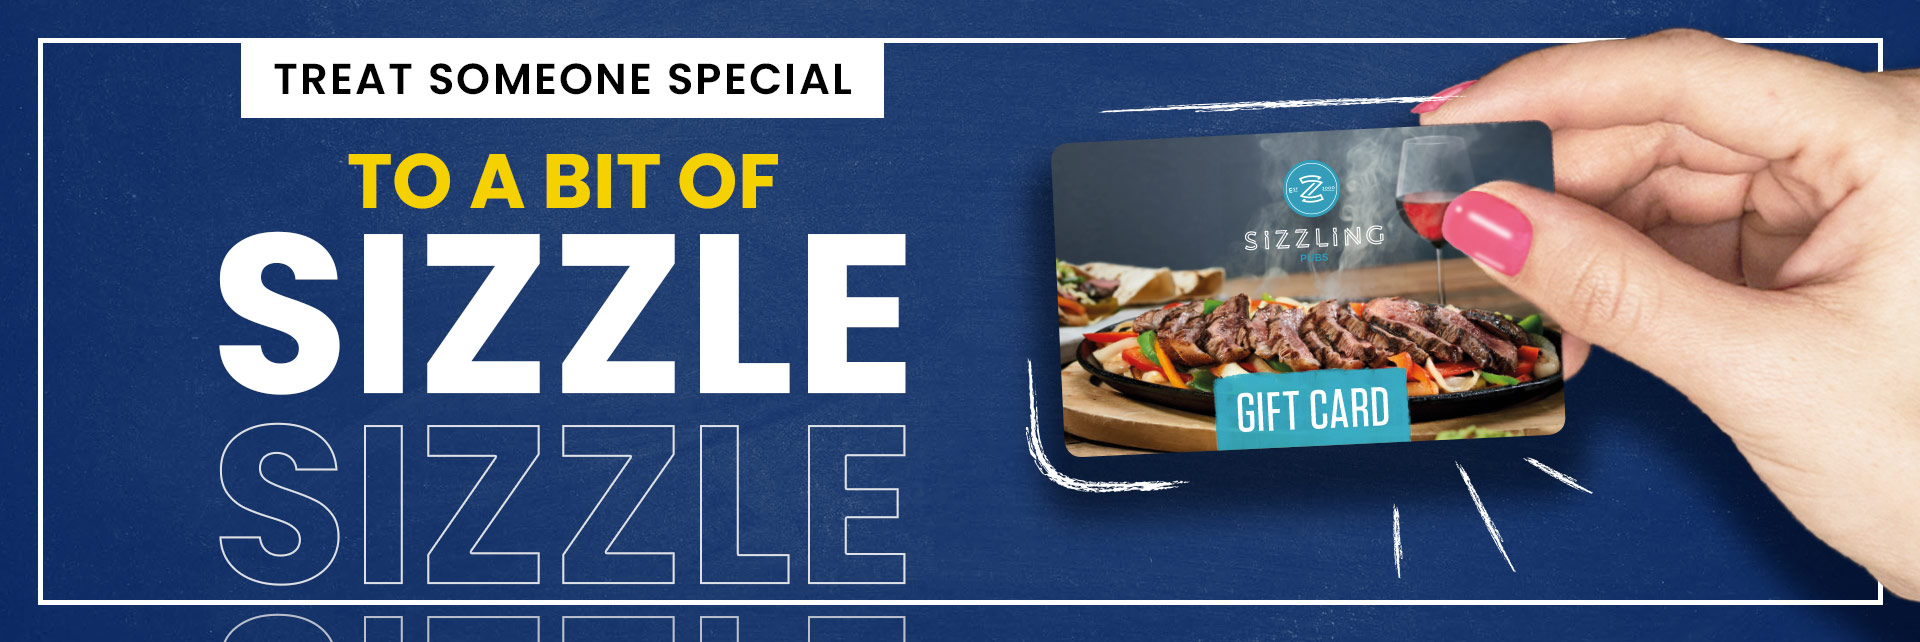 Sizzling Pubs Gift Card at The Tollgate in Romford